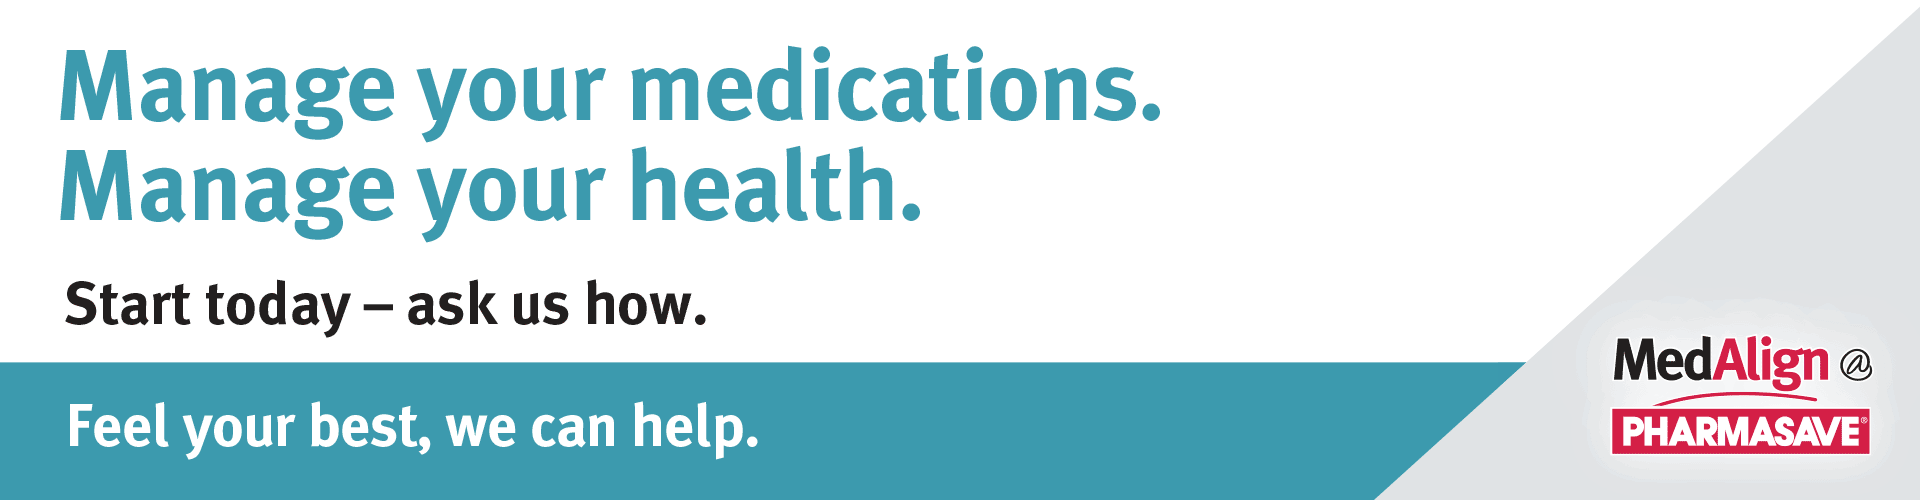 Manage your medications. Manage your health. With Pharmasave's MedAlign program. Speak with your Pharmasave pharmacist to learn more.